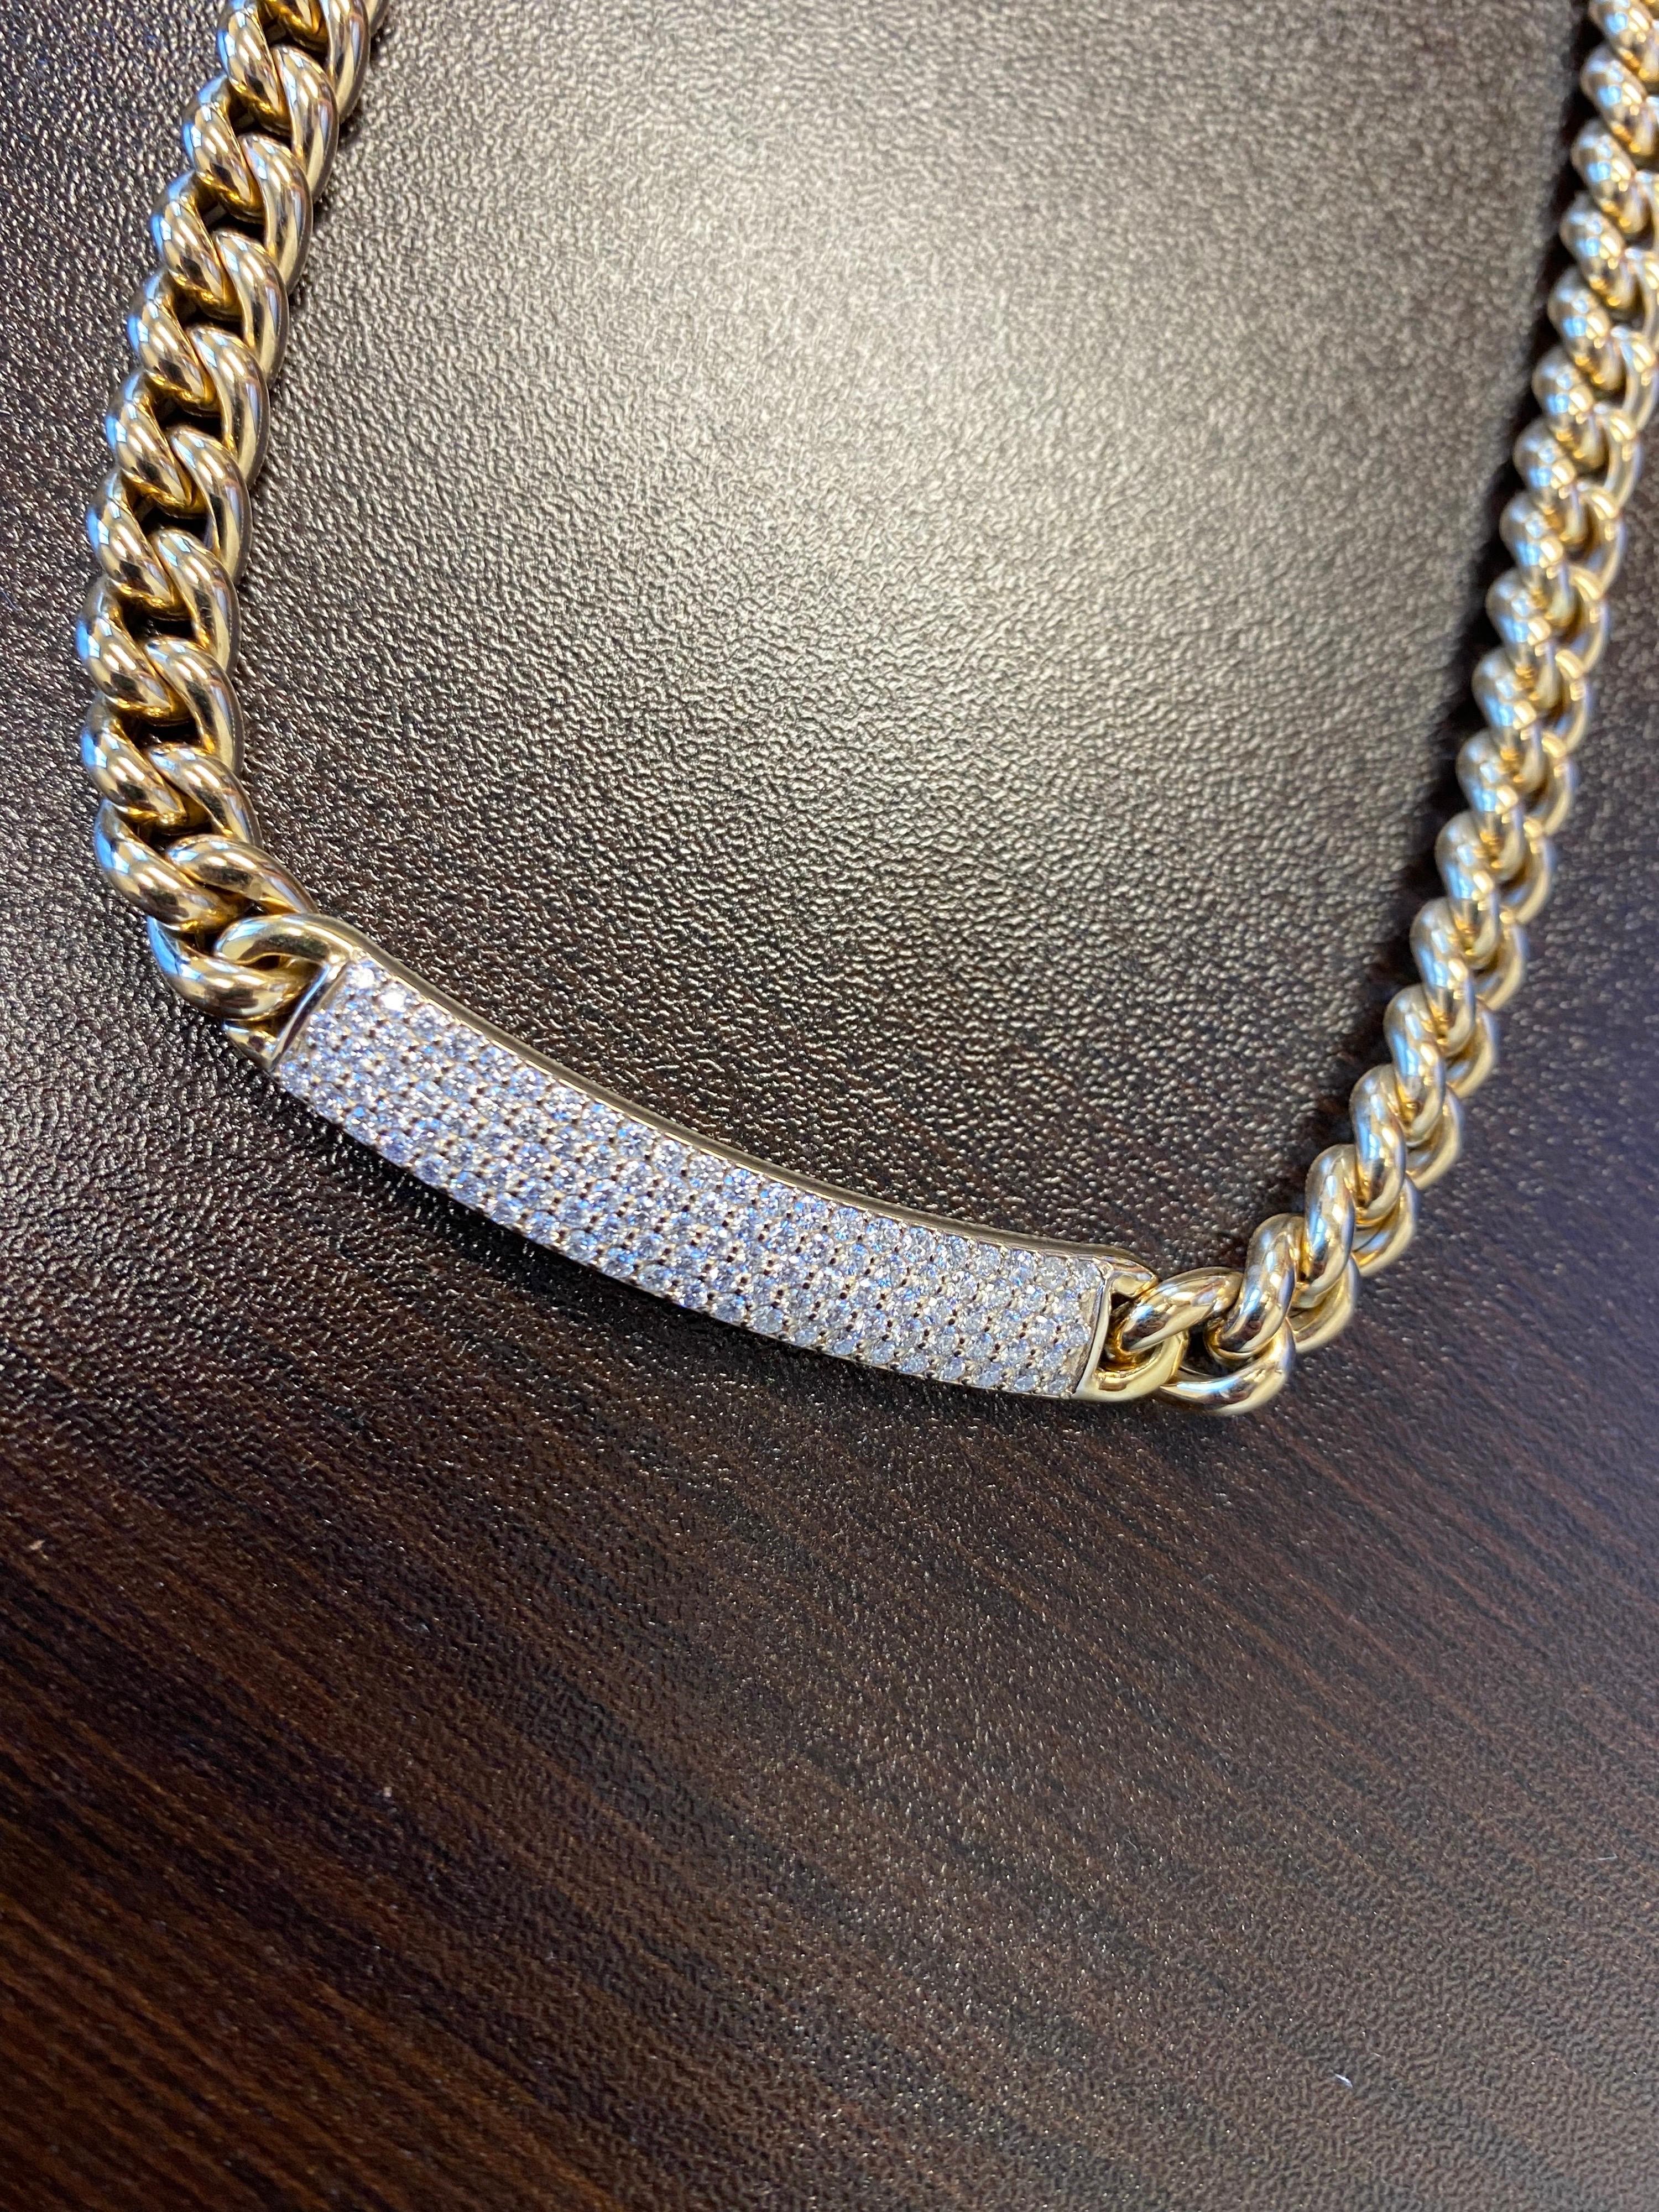 id necklace gold